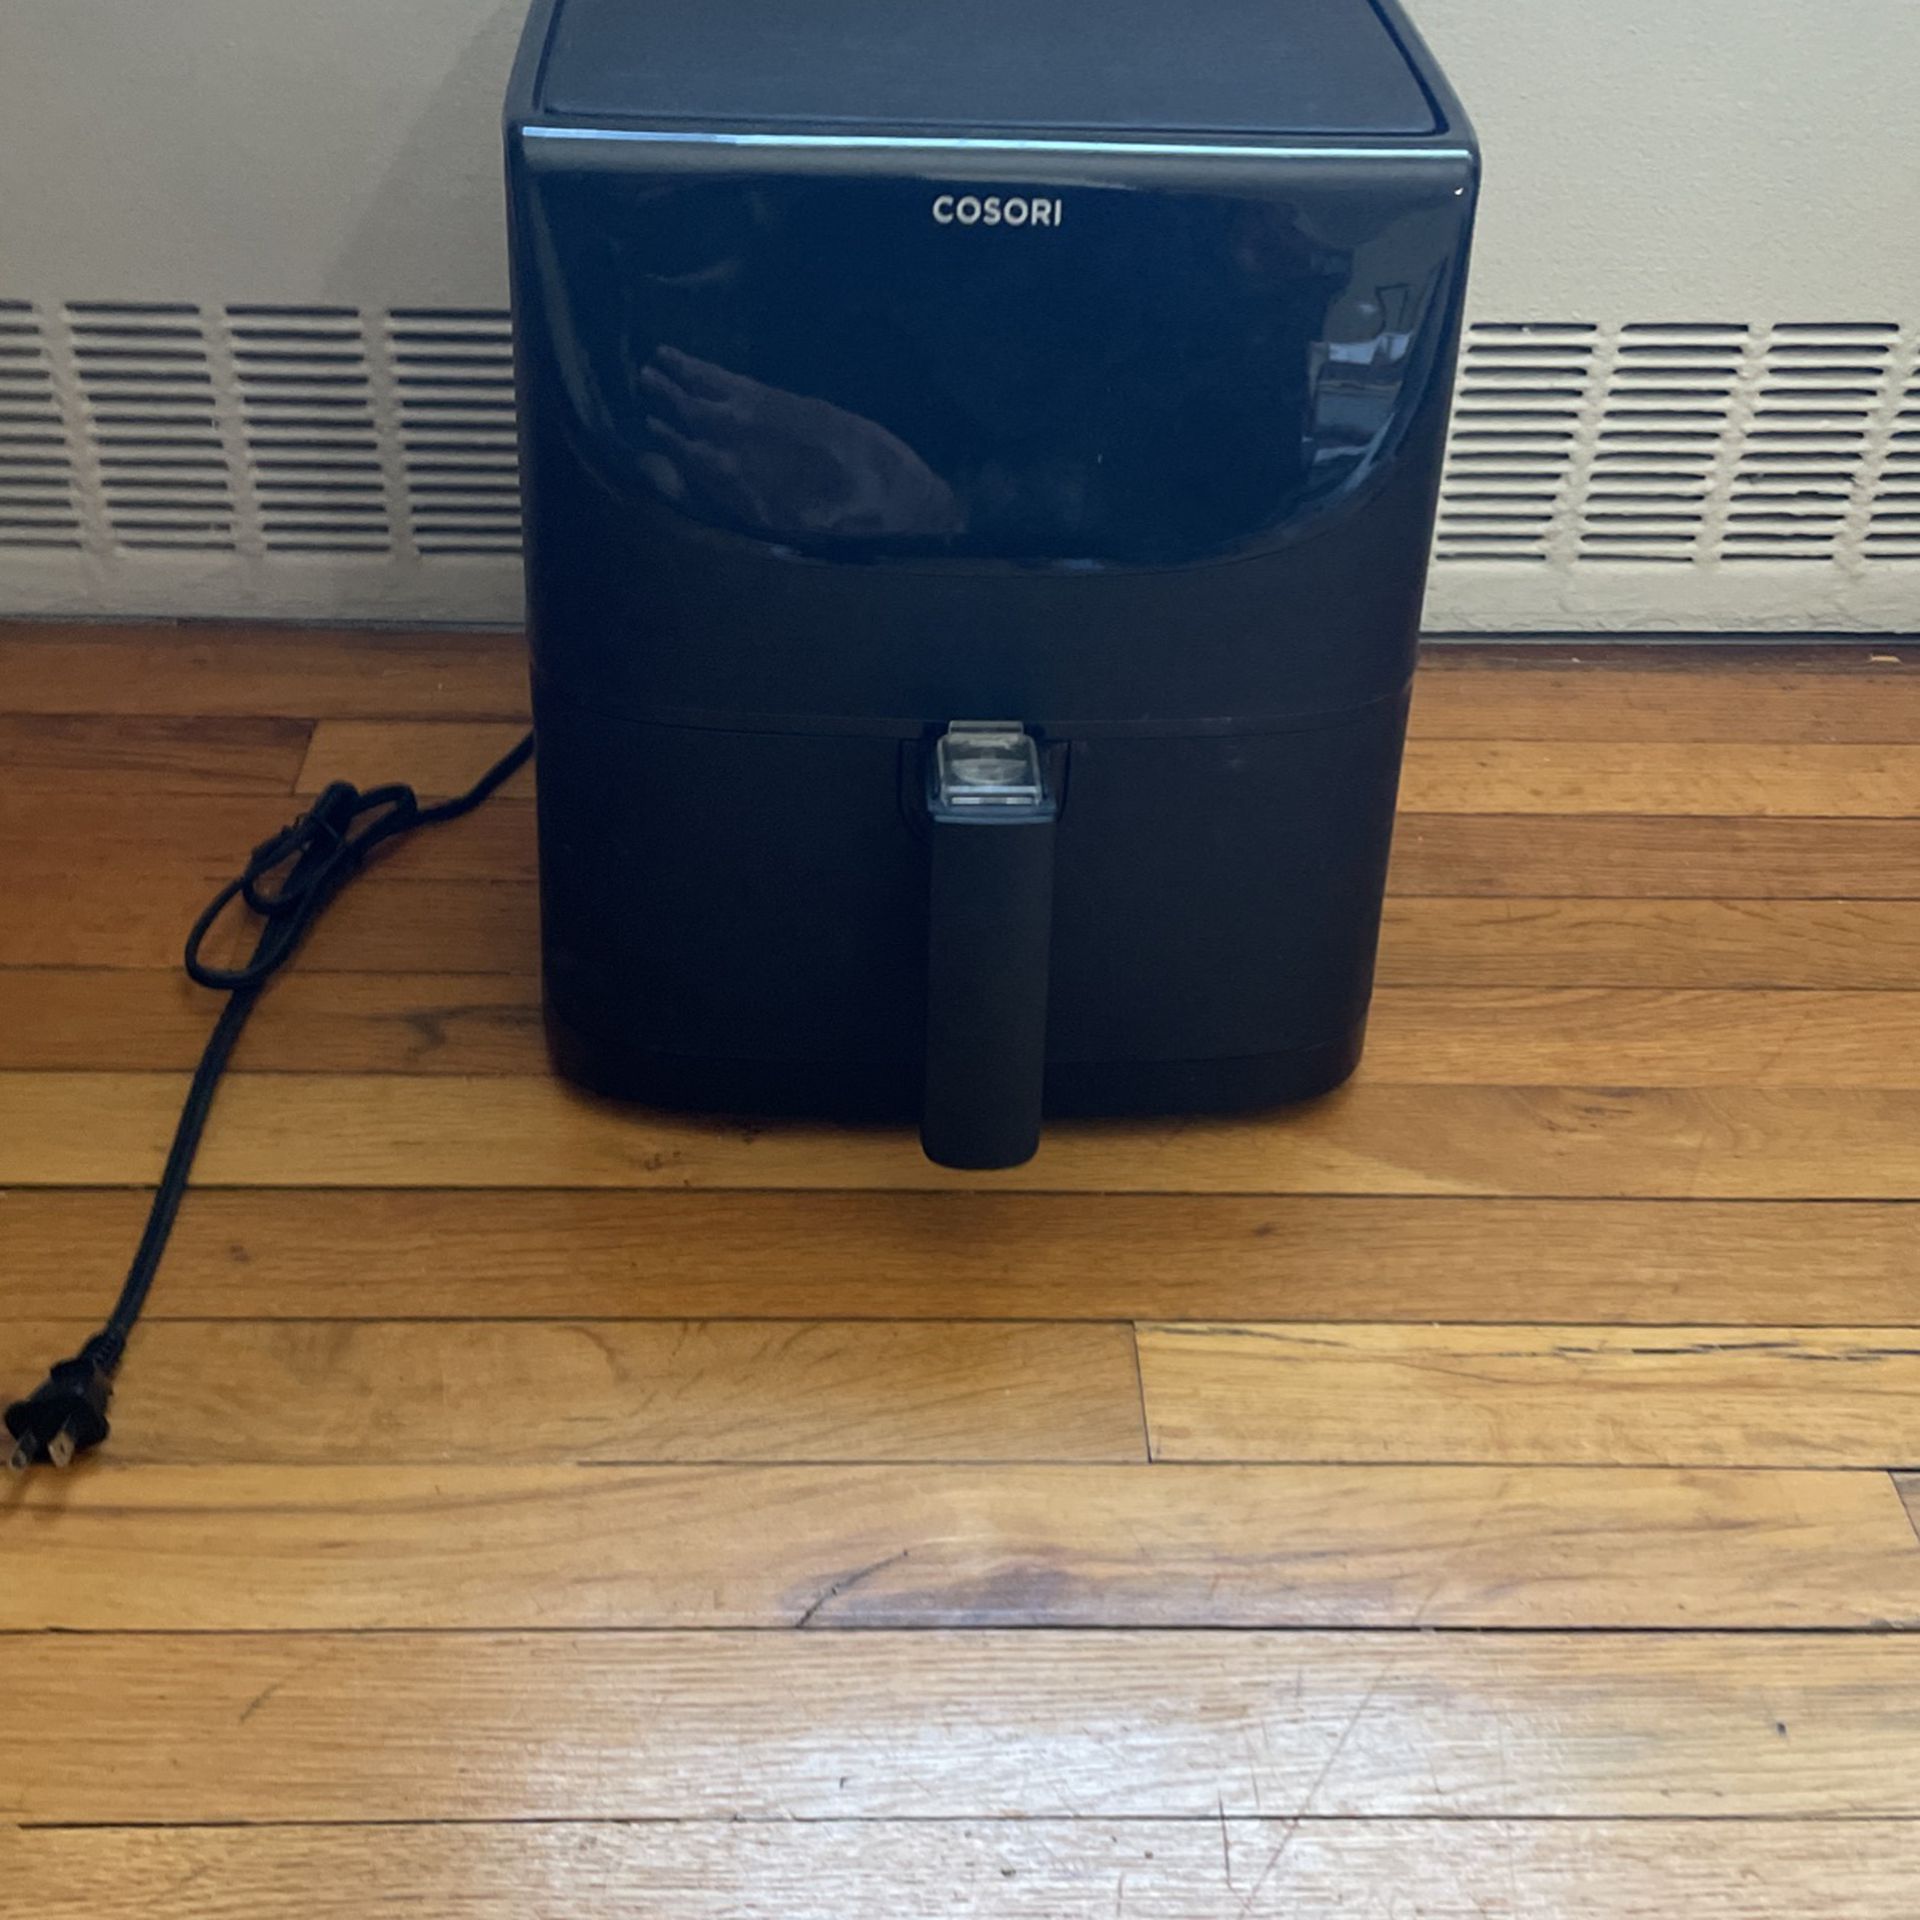 COSORI Air Fryer Oven Combo 5.8QT Max Xl Large Cooker! Used But Still Works Perfectly! Needs To Go Today! Willing To Negotiate 